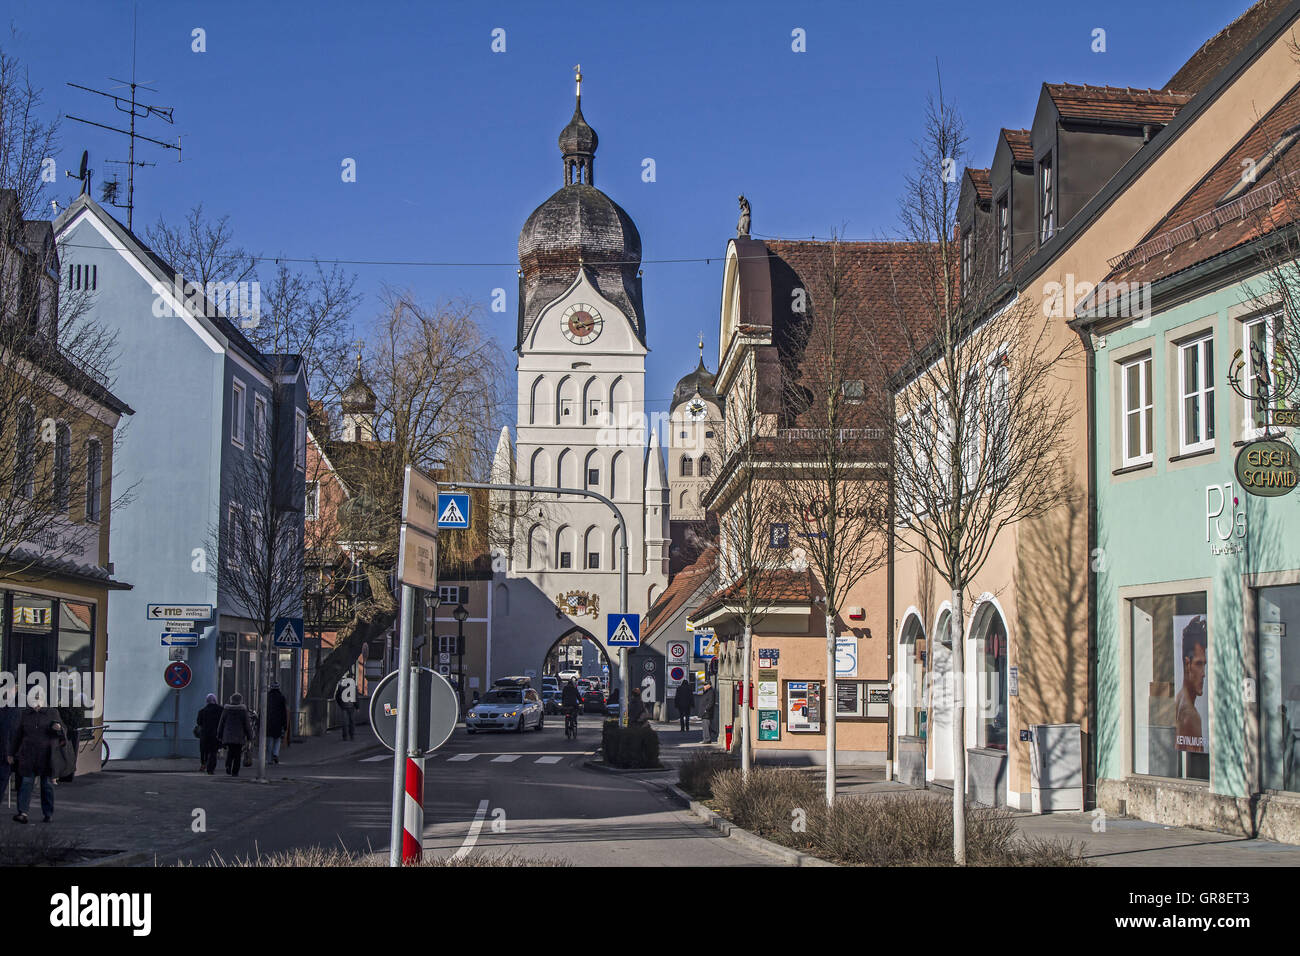 The Beautiful Tower, The Most Famous City Gate Of The Town Of Erding Stock Photo